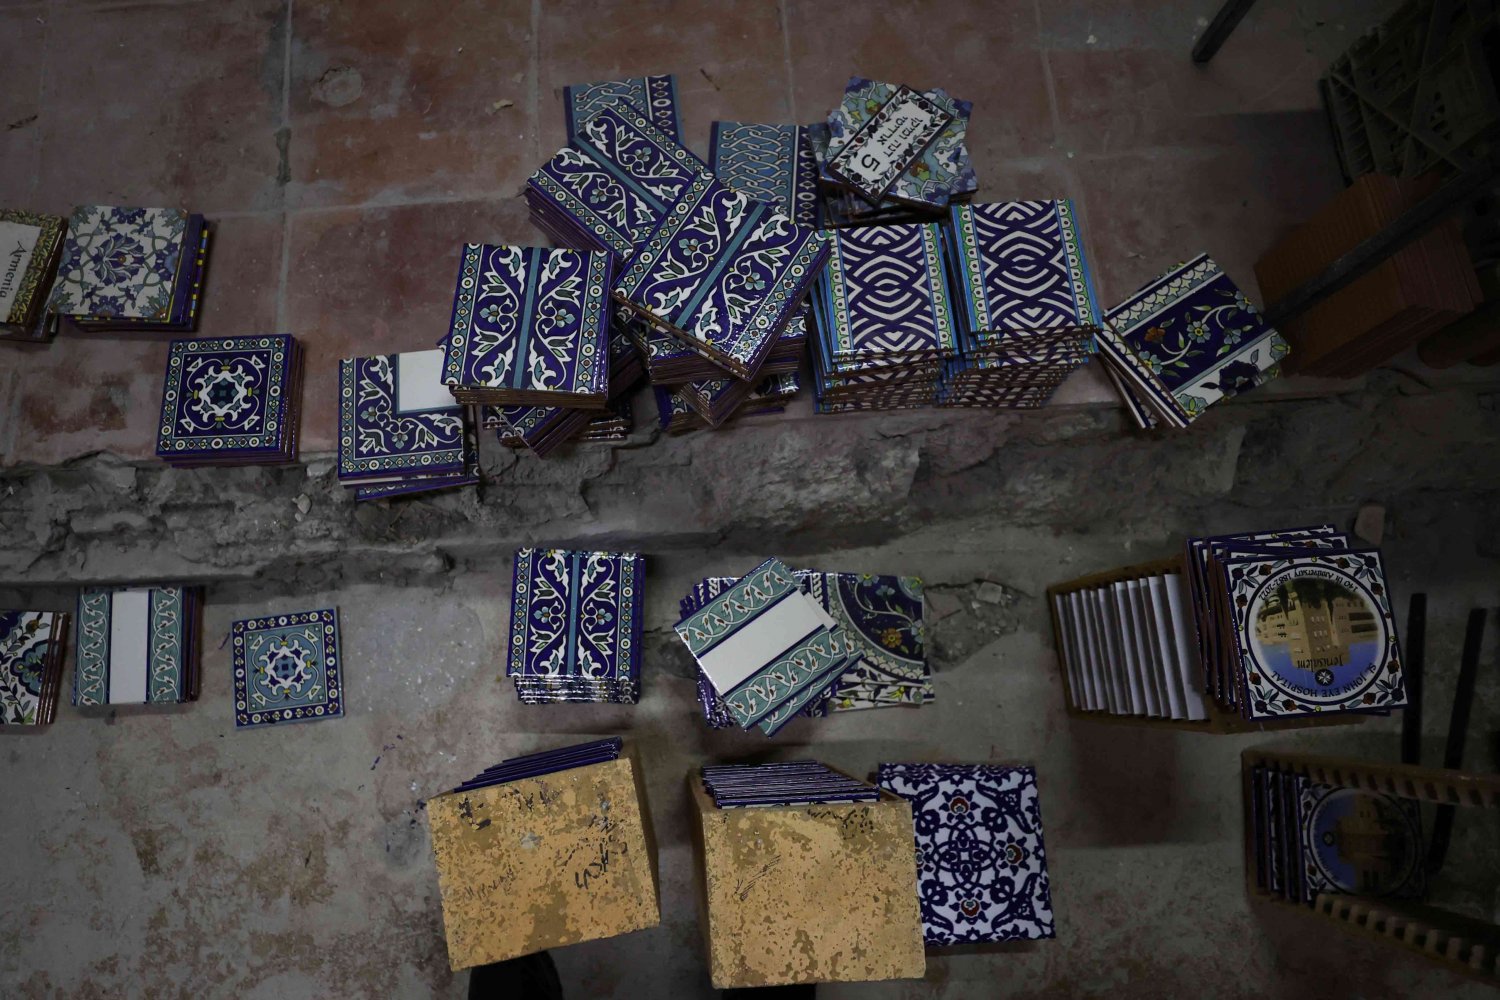 Ceramic tiles hand-painted with Arabesque designs are ready for packing at the Balian Armenian pottery workshop, Jerusalem 